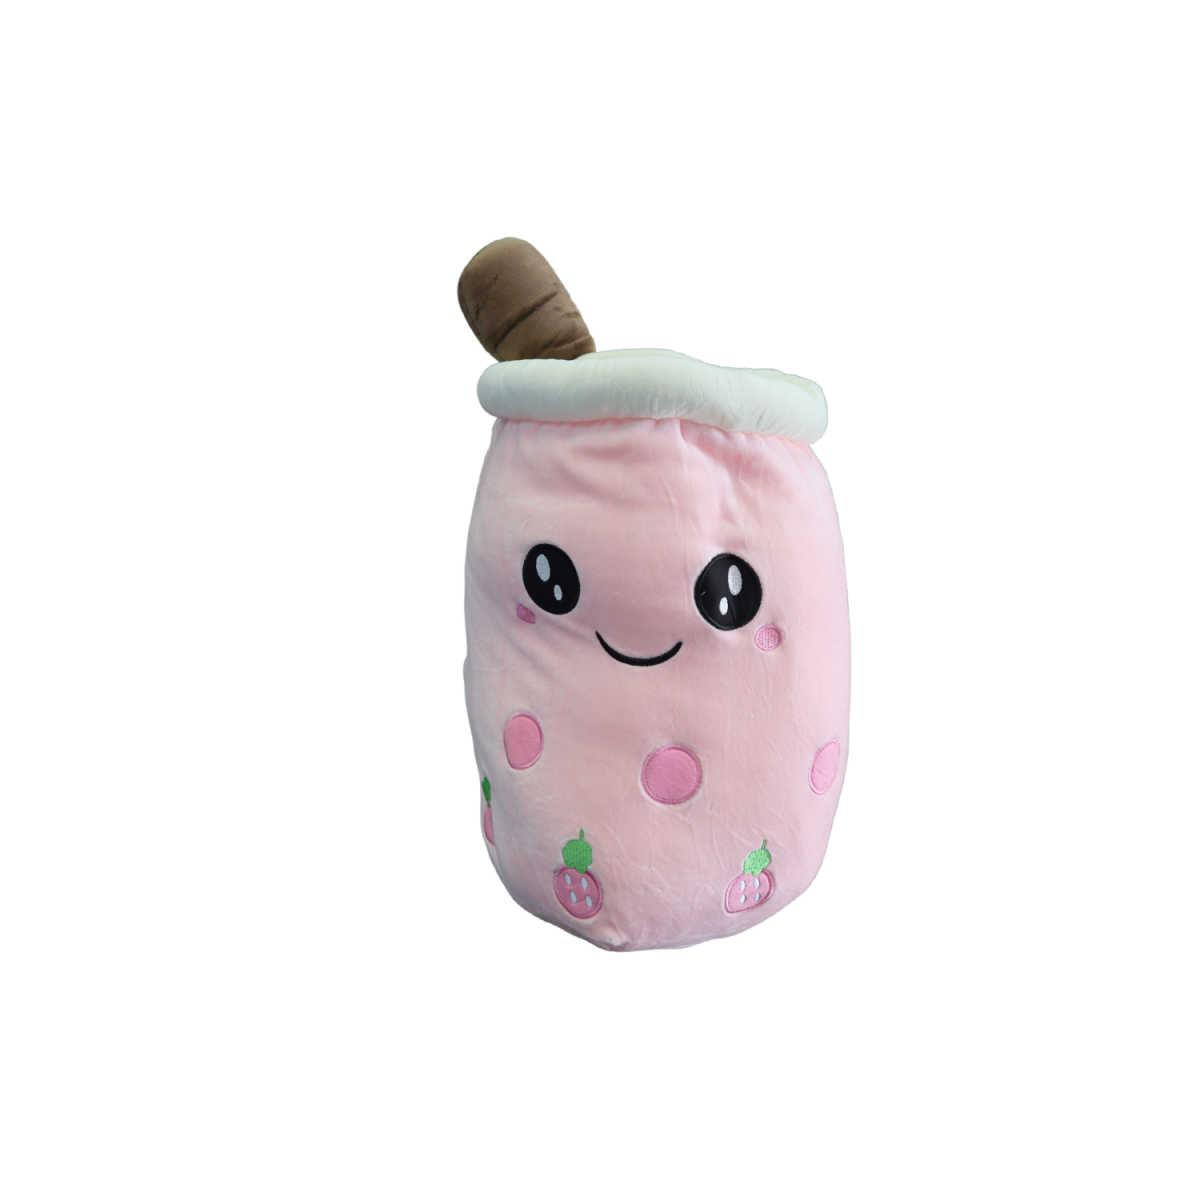 Boba Tea "L" Size Strawberry Plushie Toy (OPEN Eyes) - 20 Inches Tall/ 10 Inches Wide-Plushie-Zobie Productions-Zobie Productions